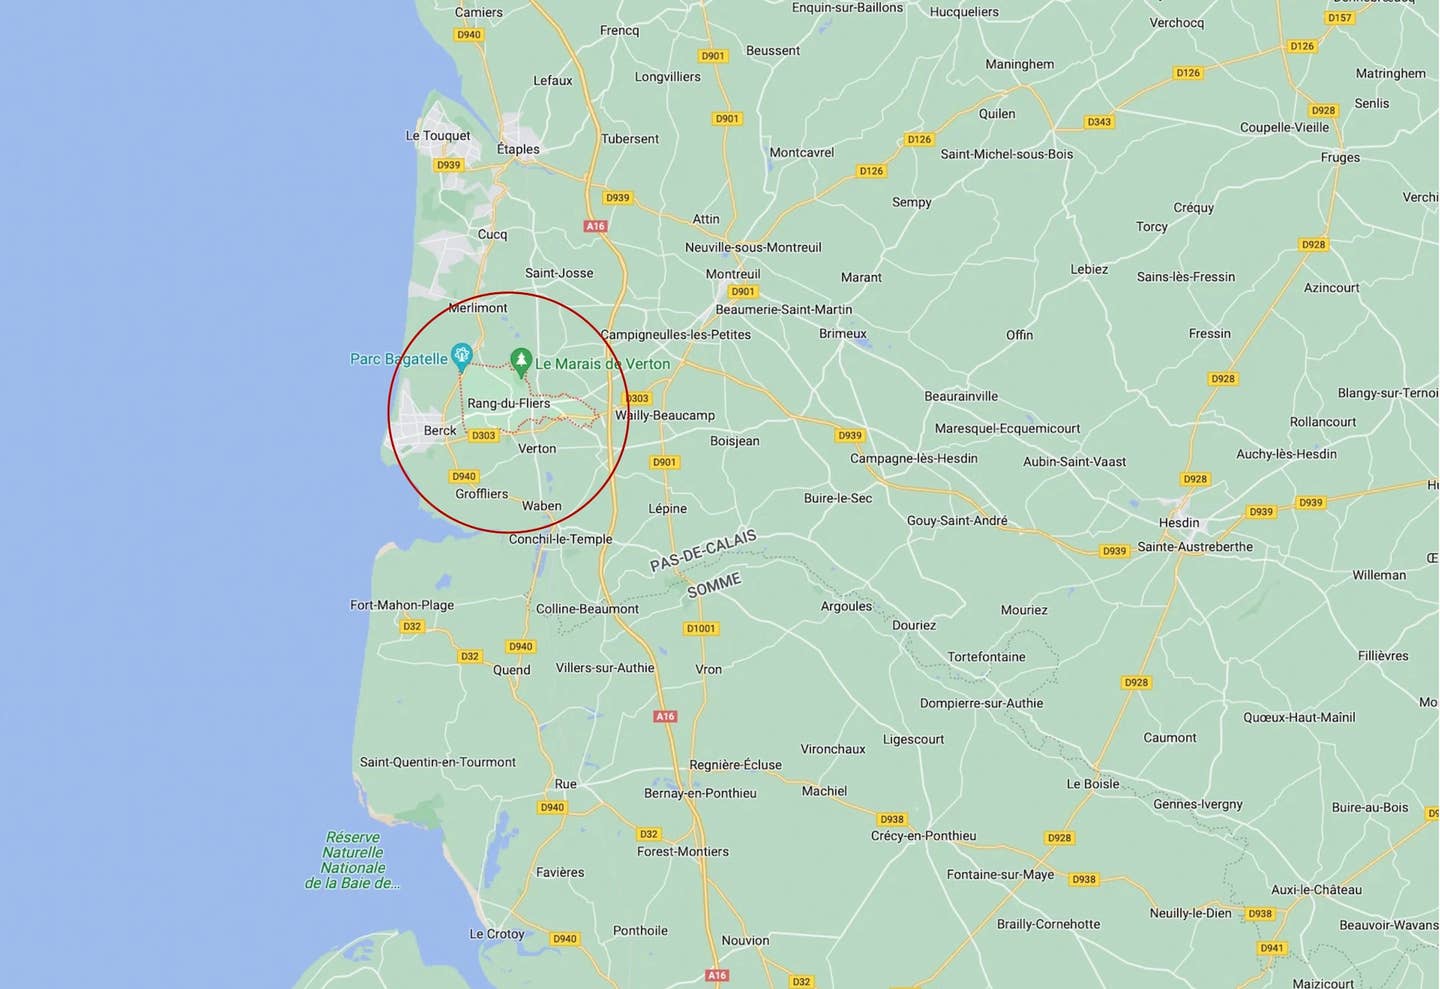 Rang-du-Fliers (circled in red), a commune in the Pas-de-Calais department in the Hauts-de-France region of France, seen in relation to Somme and the nearby commune of Berck. <em>Google Maps</em>